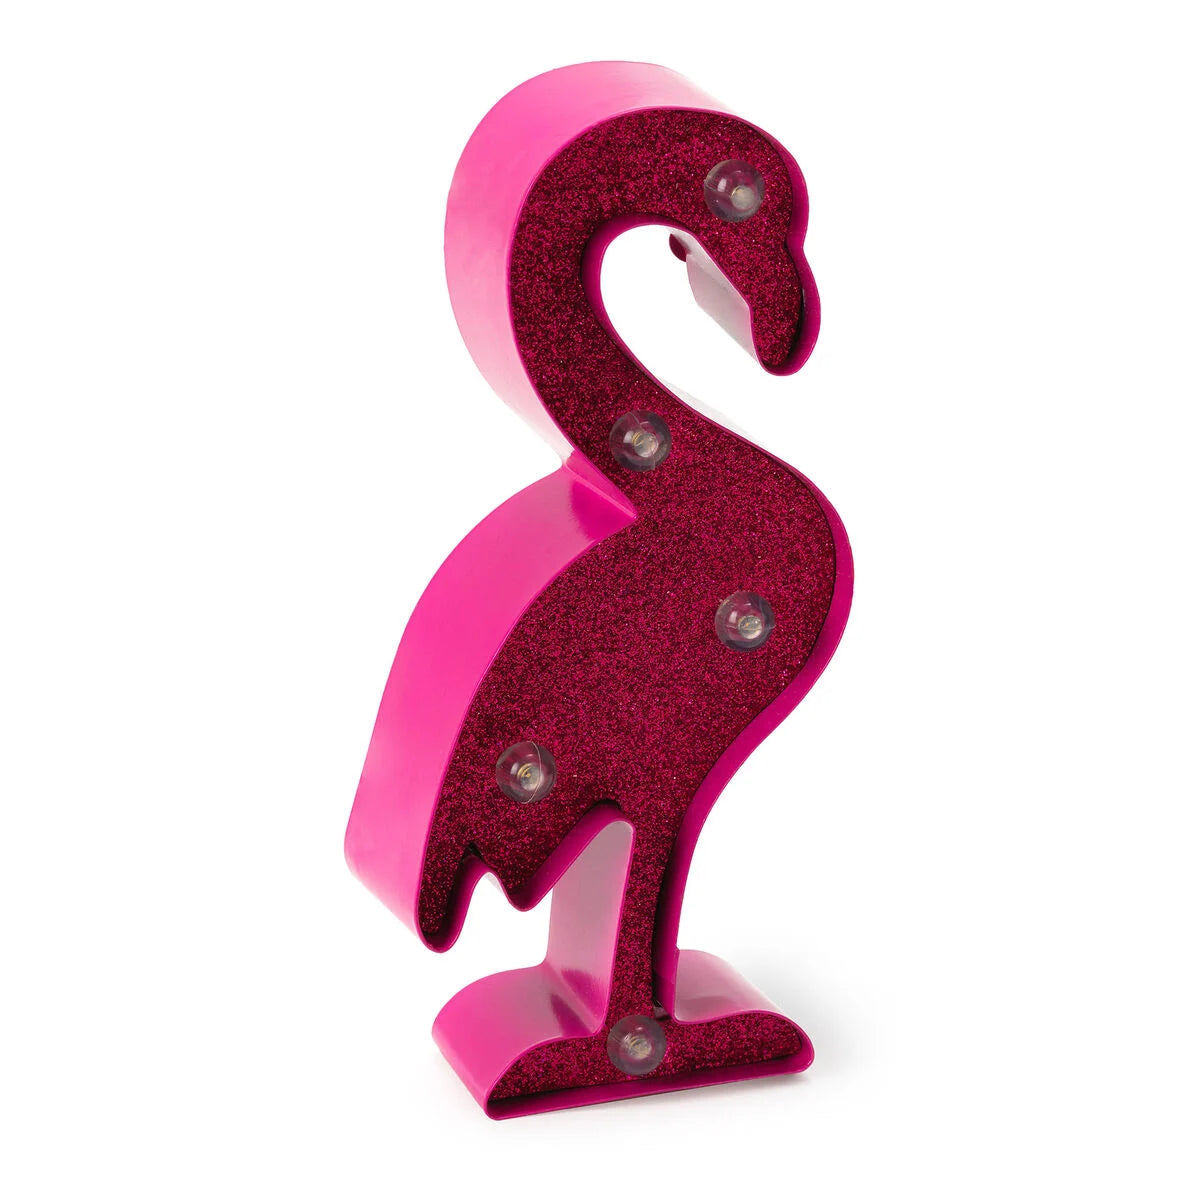 Fab Gifts | Legami Mini Letter Light Flamingo by Weirs of Baggot Street